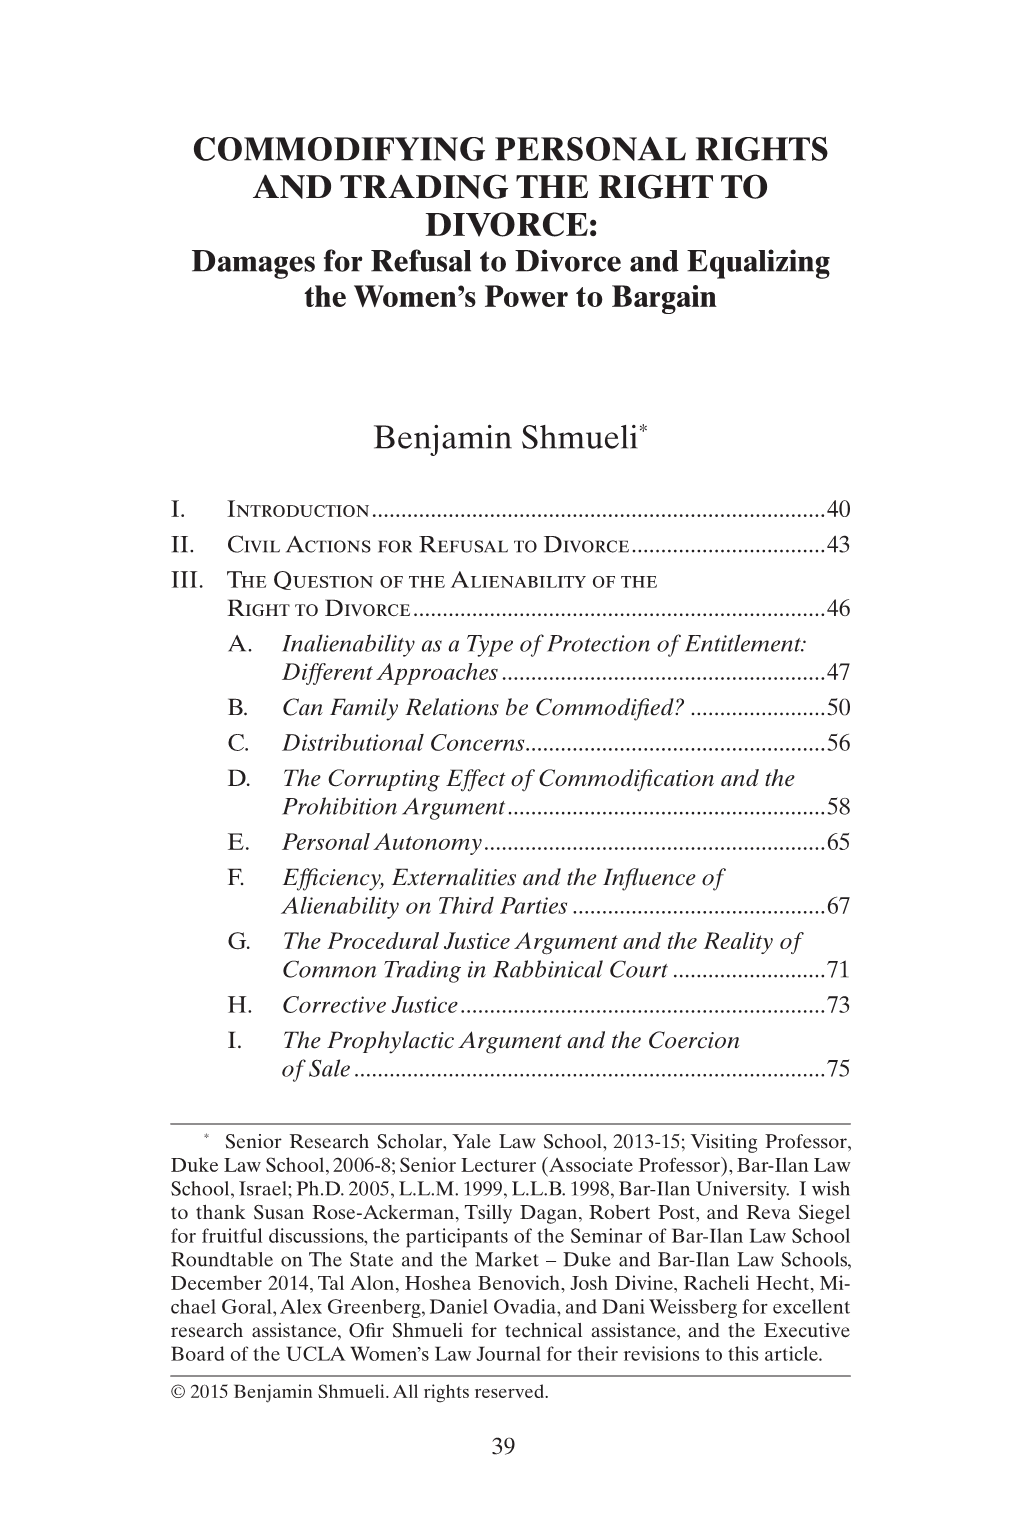 Damages for Refusal to Divorce and Equalizing the Women’S Power to Bargain